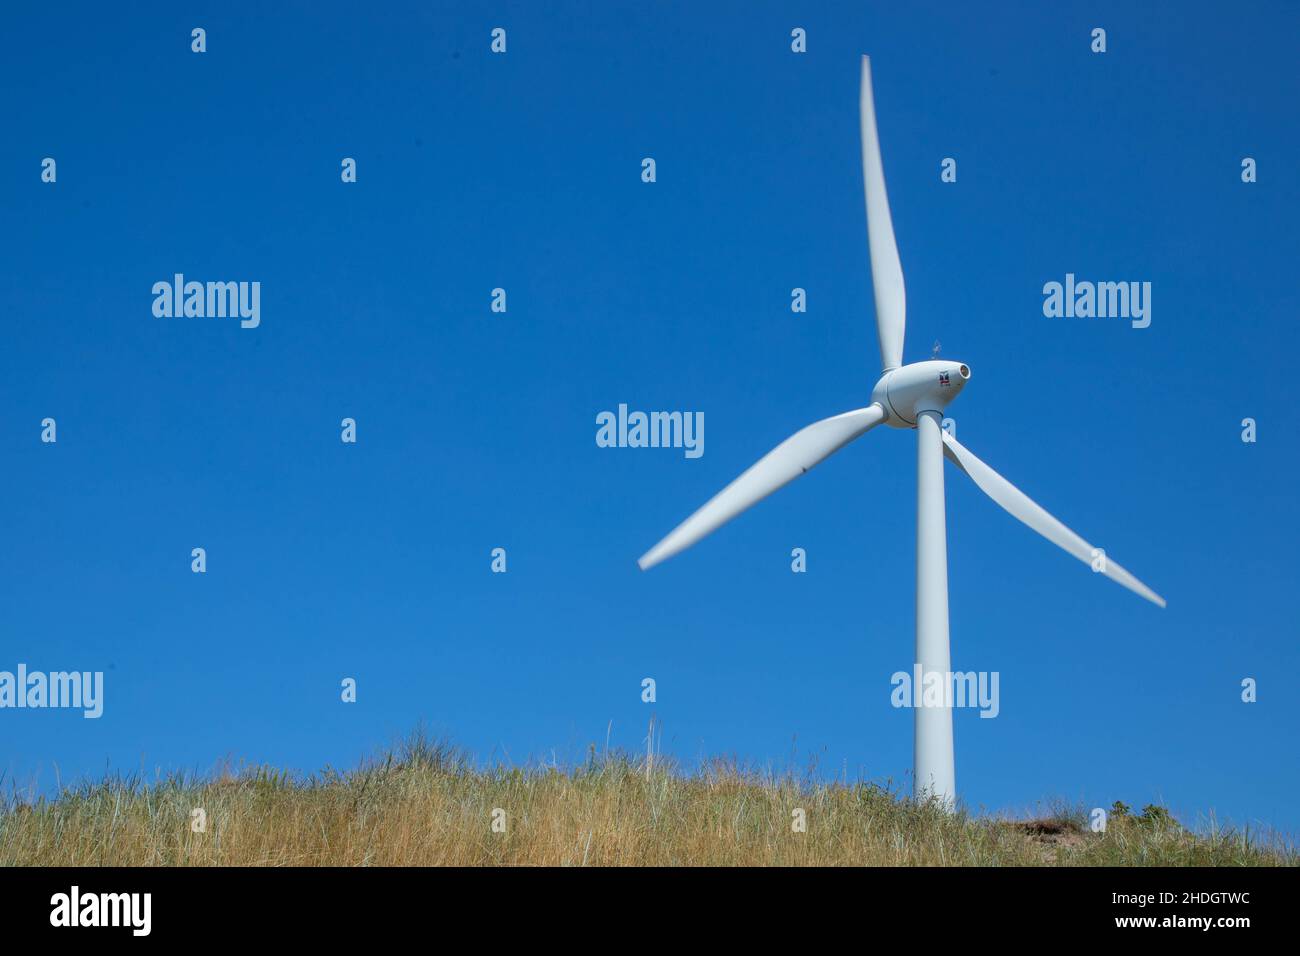 Windmill for electricity generation the background of a blue sky. Stock Photo